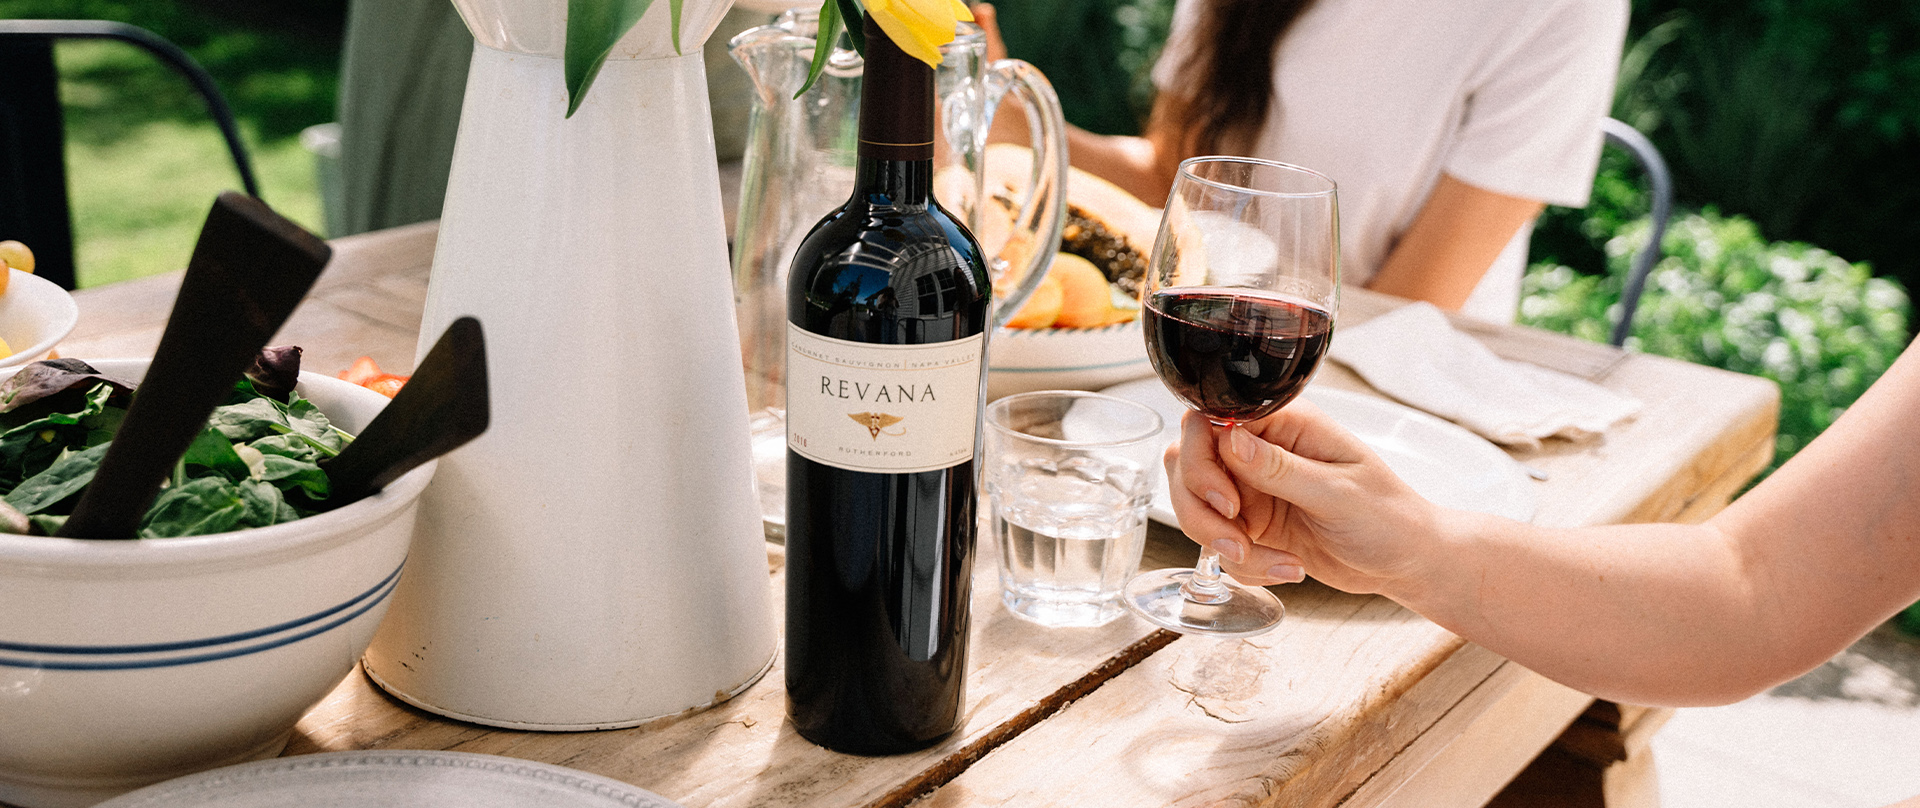 Revana Wine on a table with people